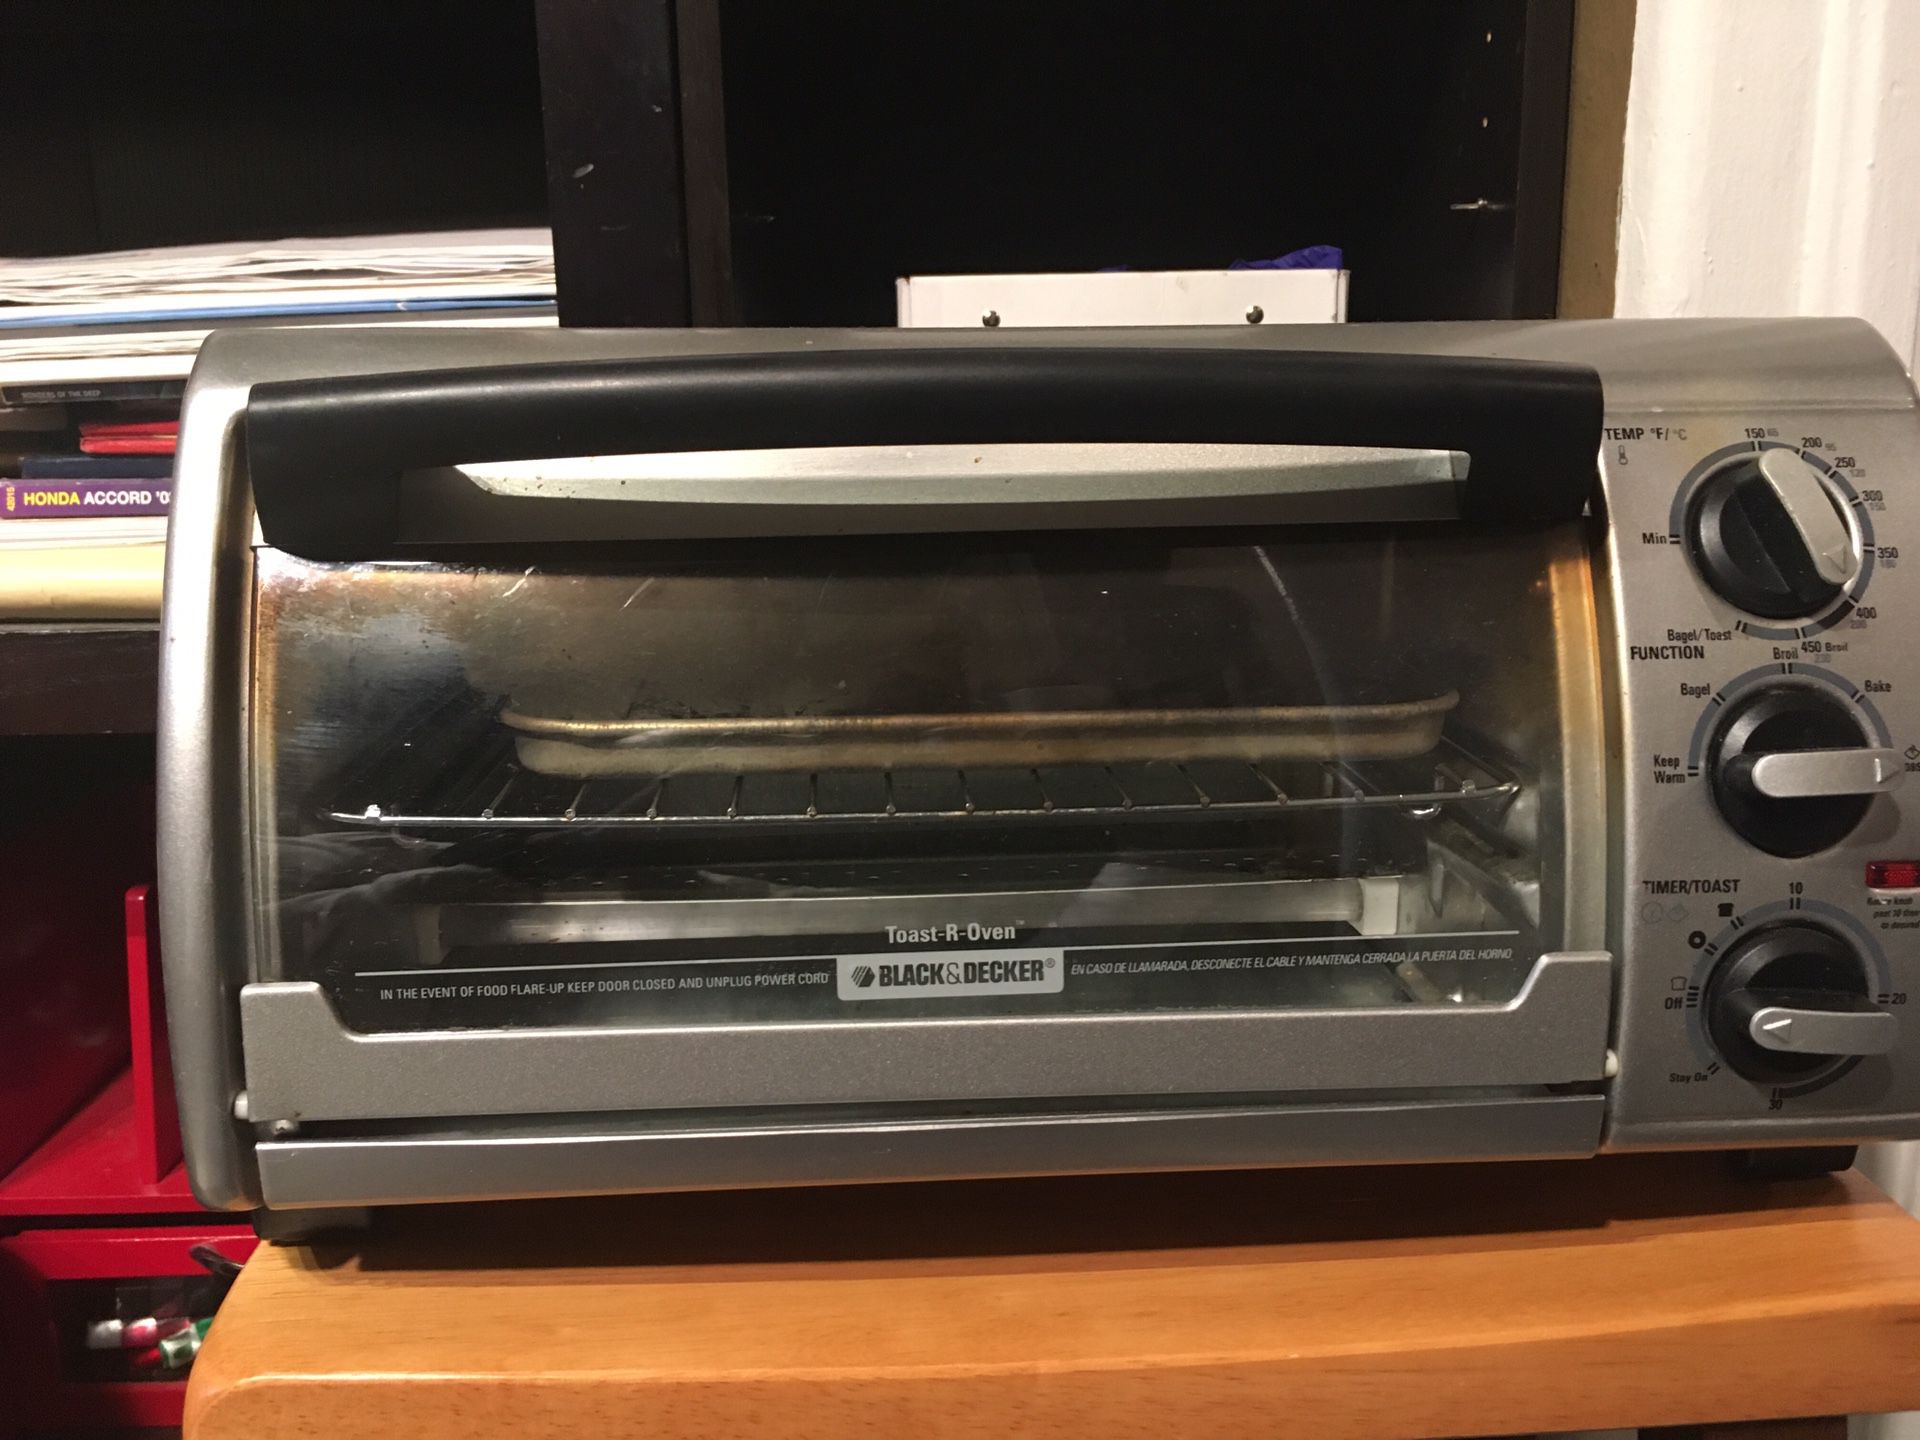 Black and decker bread toaster